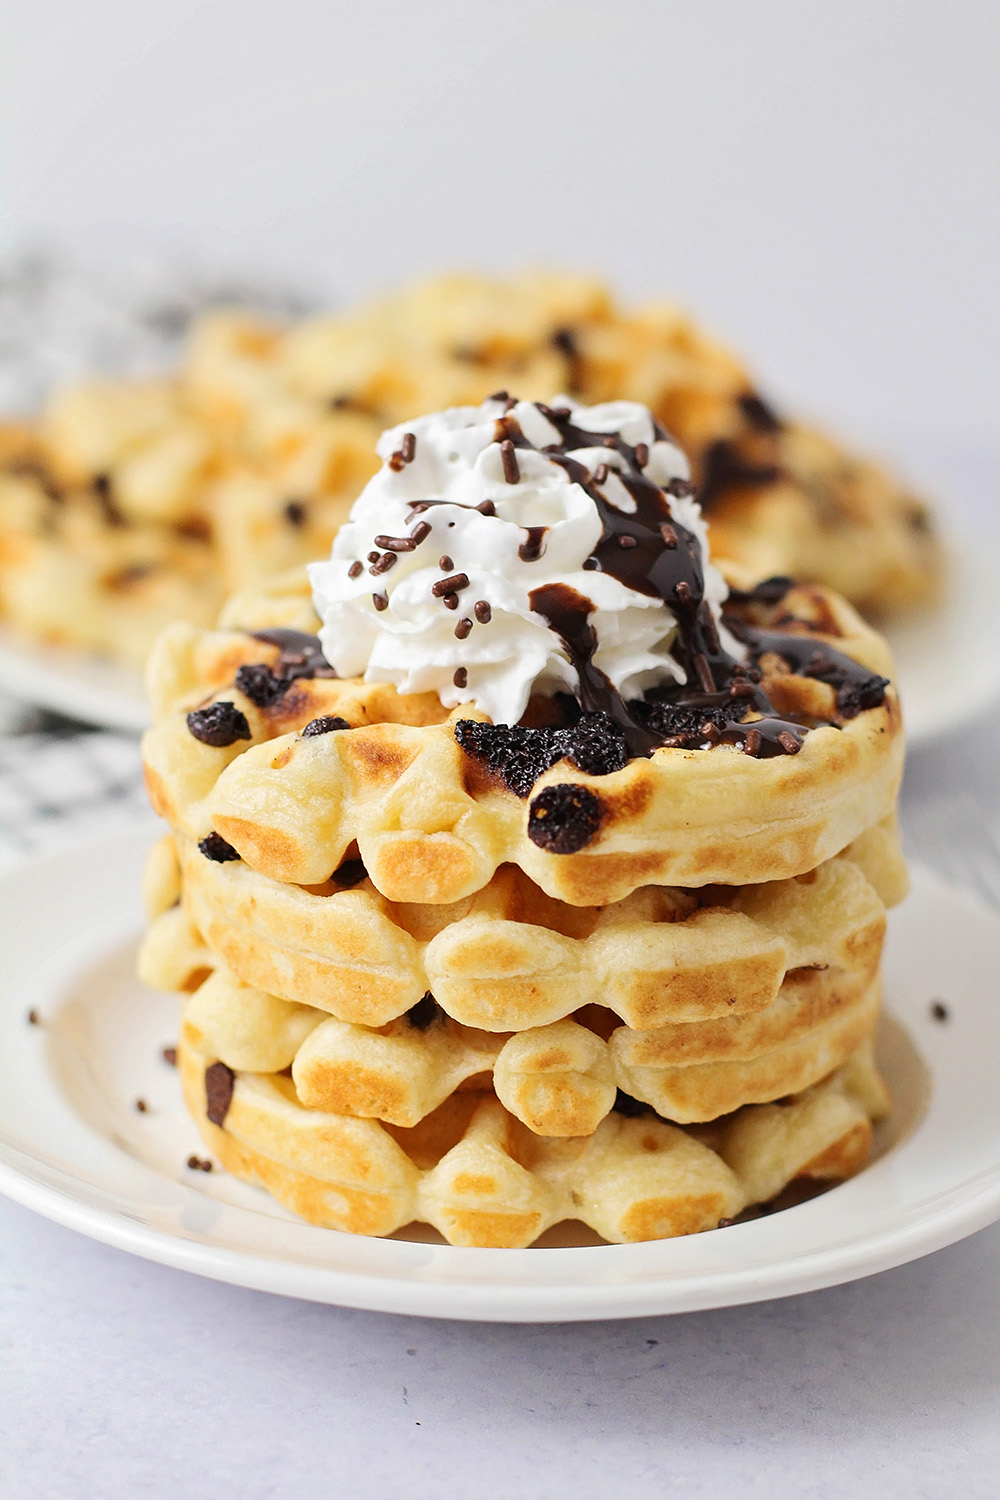 These chocolate chip waffles are totally delicious, and so easy to make. They're the perfect way to start the day!